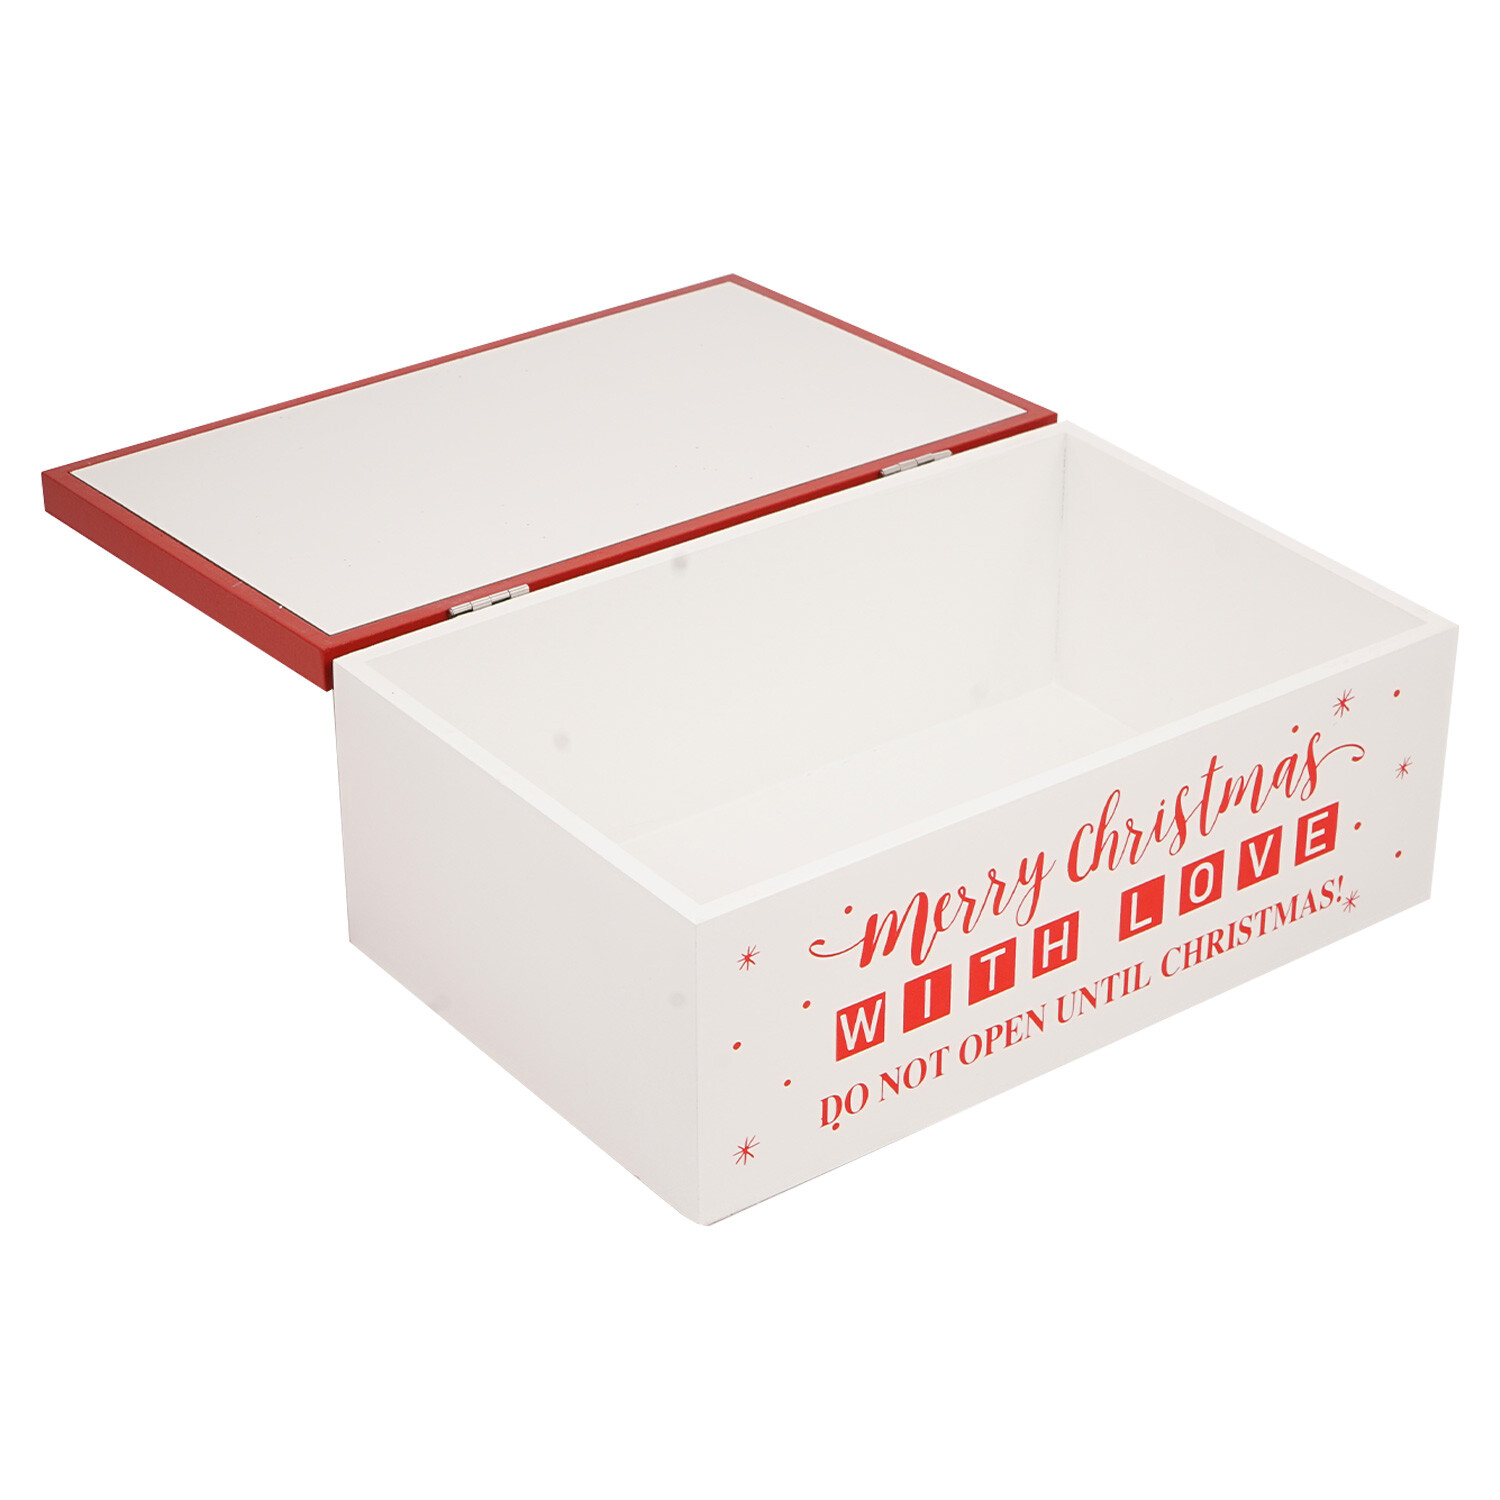 Red and White Christmas Eve Box - White Image 3